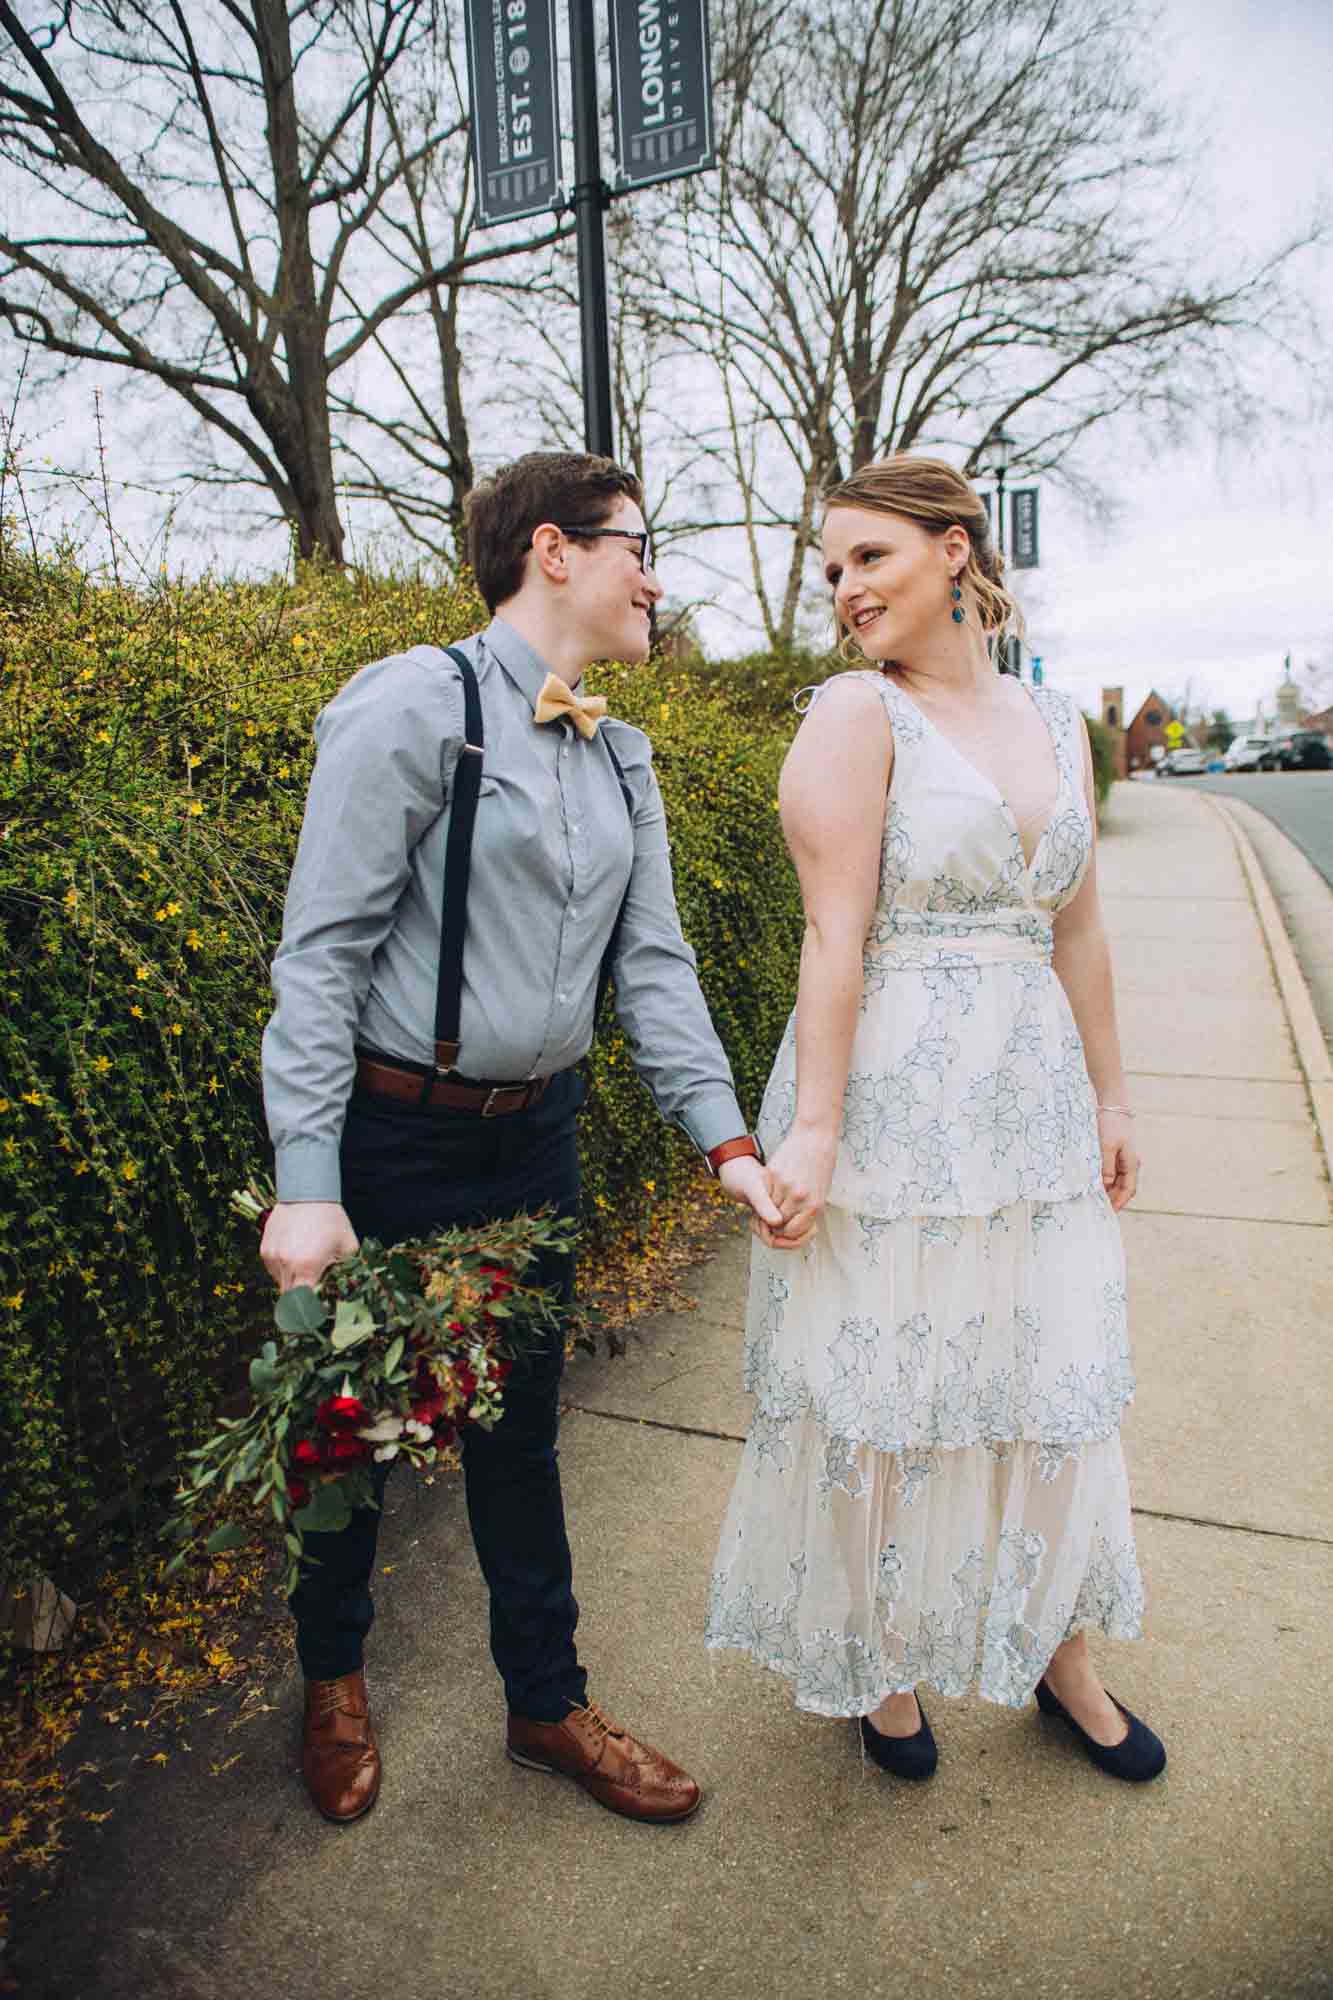 Quirky and magical Harry Potter-themed wedding ideas | C York Photography | Featured on Equally Wed, the leading LGBTQ+ wedding magazine